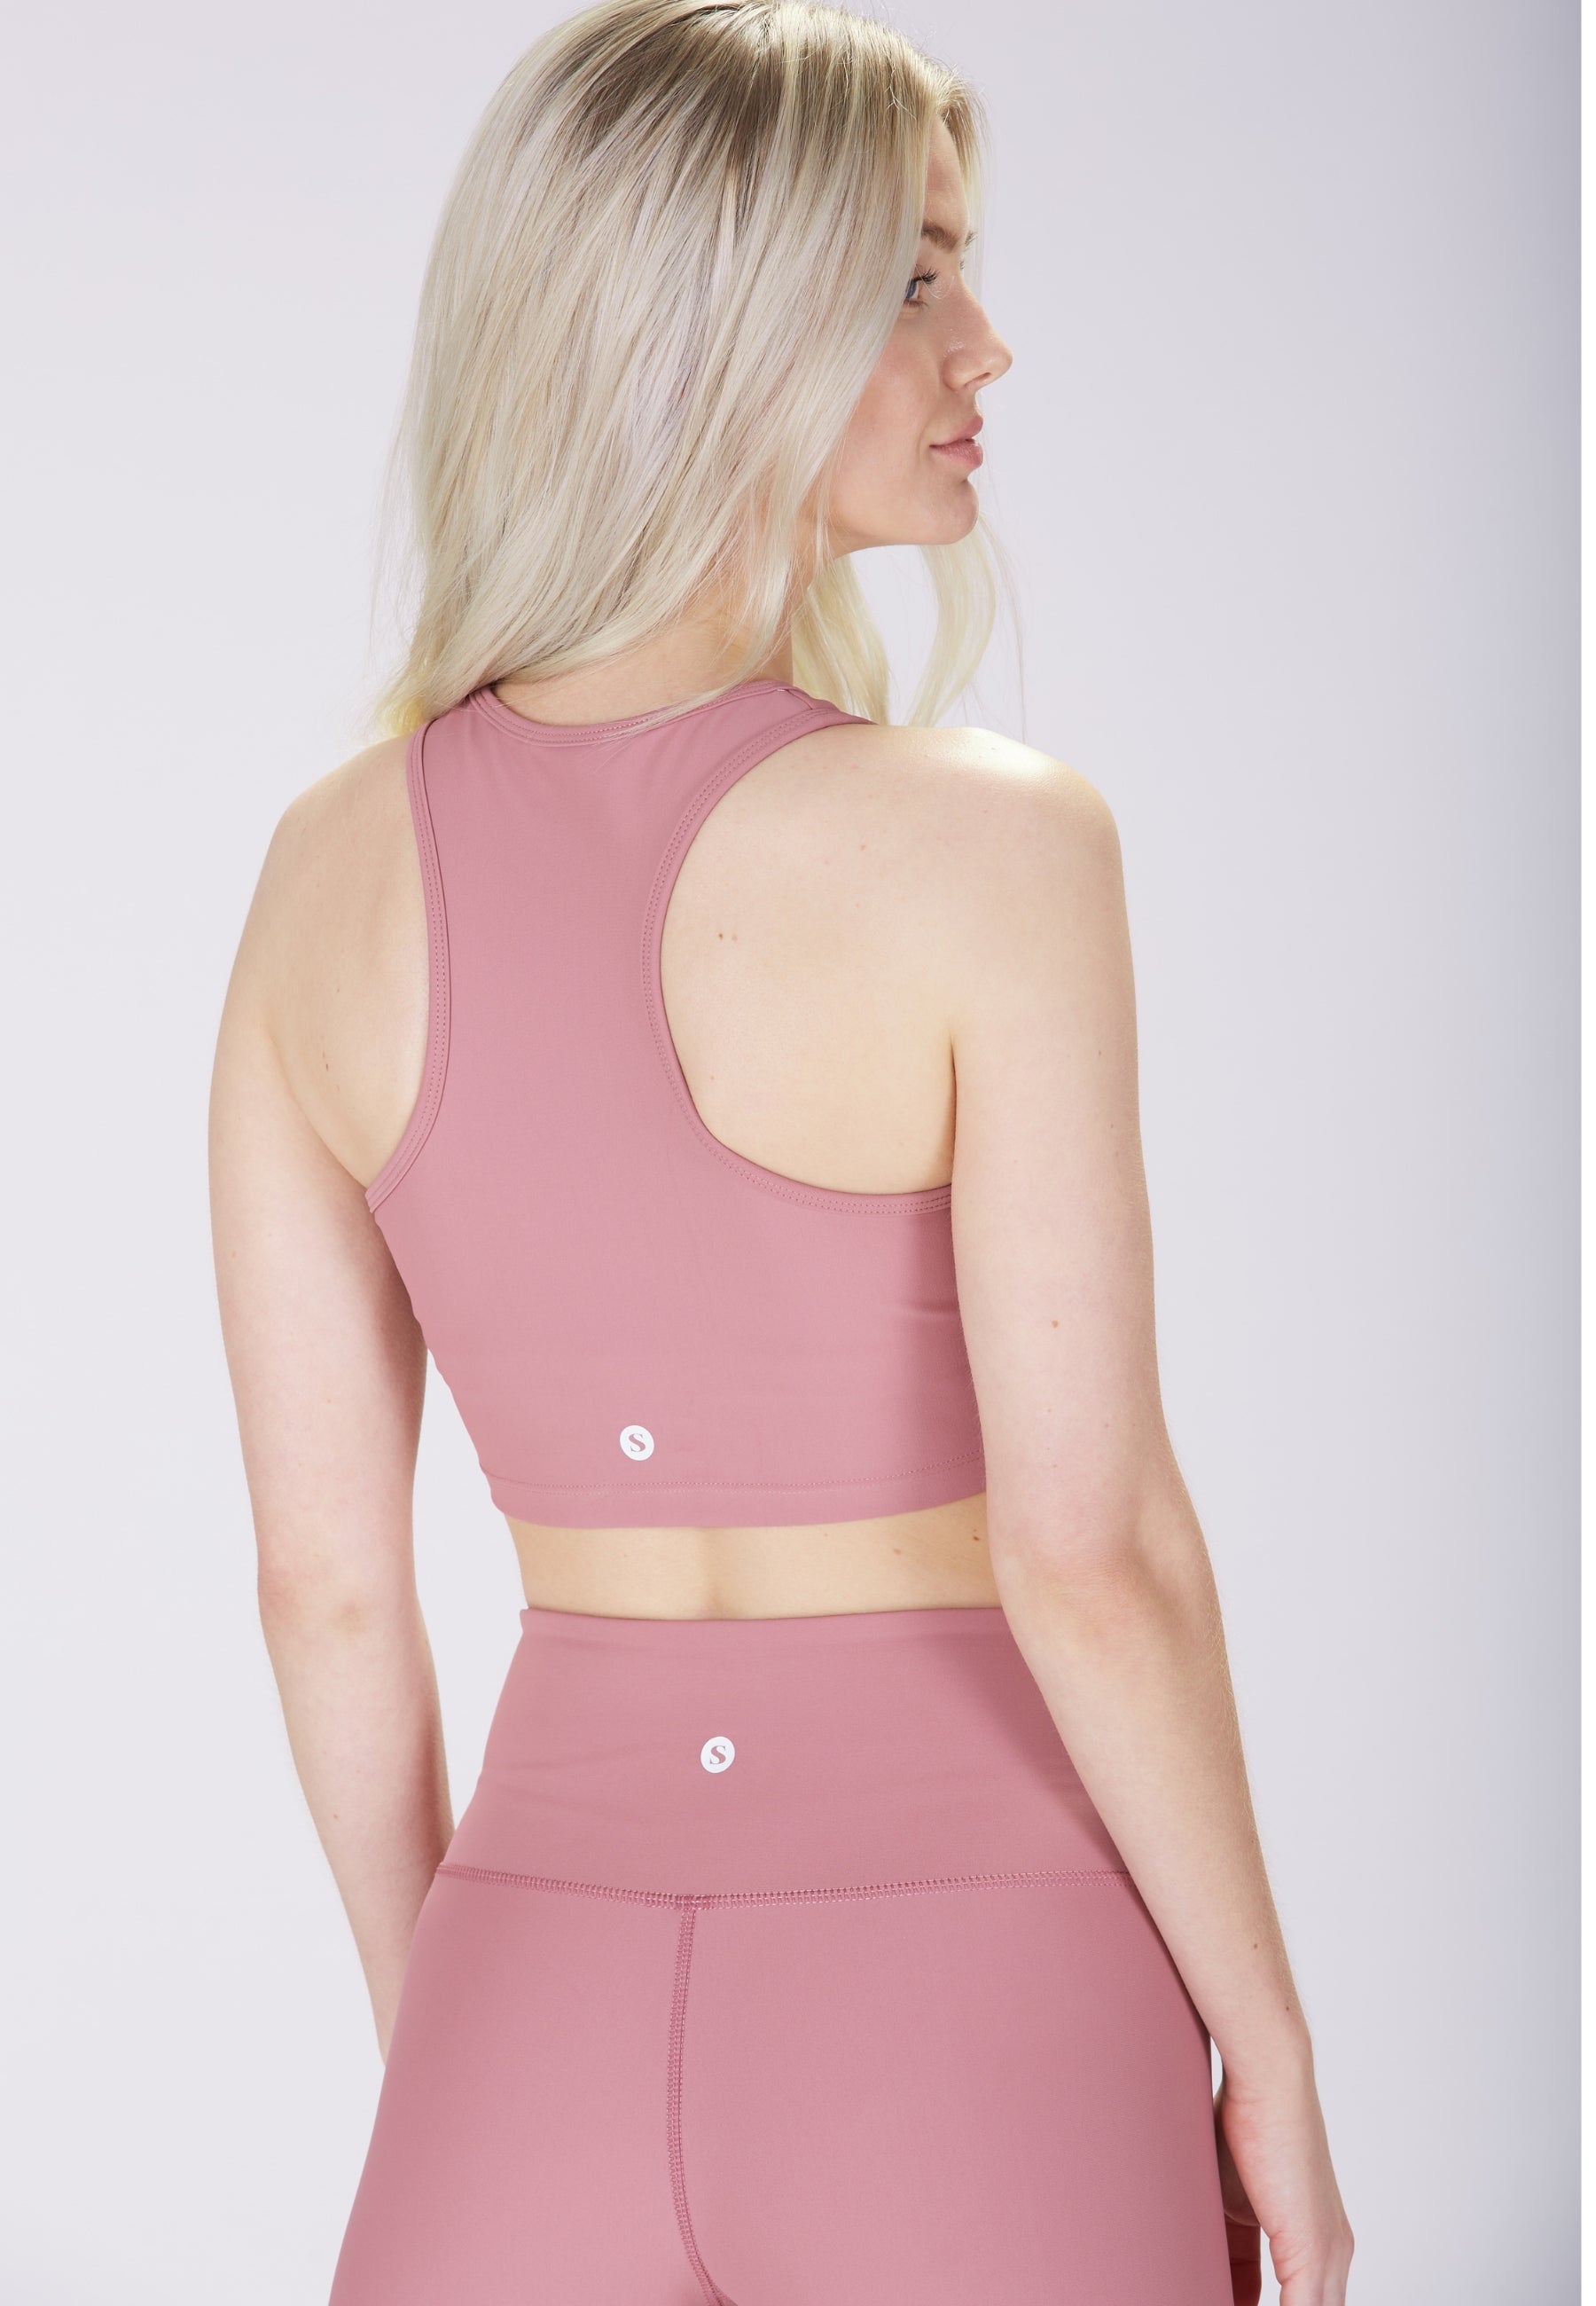 Sisterly Tribe - Midi Crop Top Dusty Pink. Light to medium support, Built-in bra & classic racer back style, Buttery Soft & light, matte fabric. 